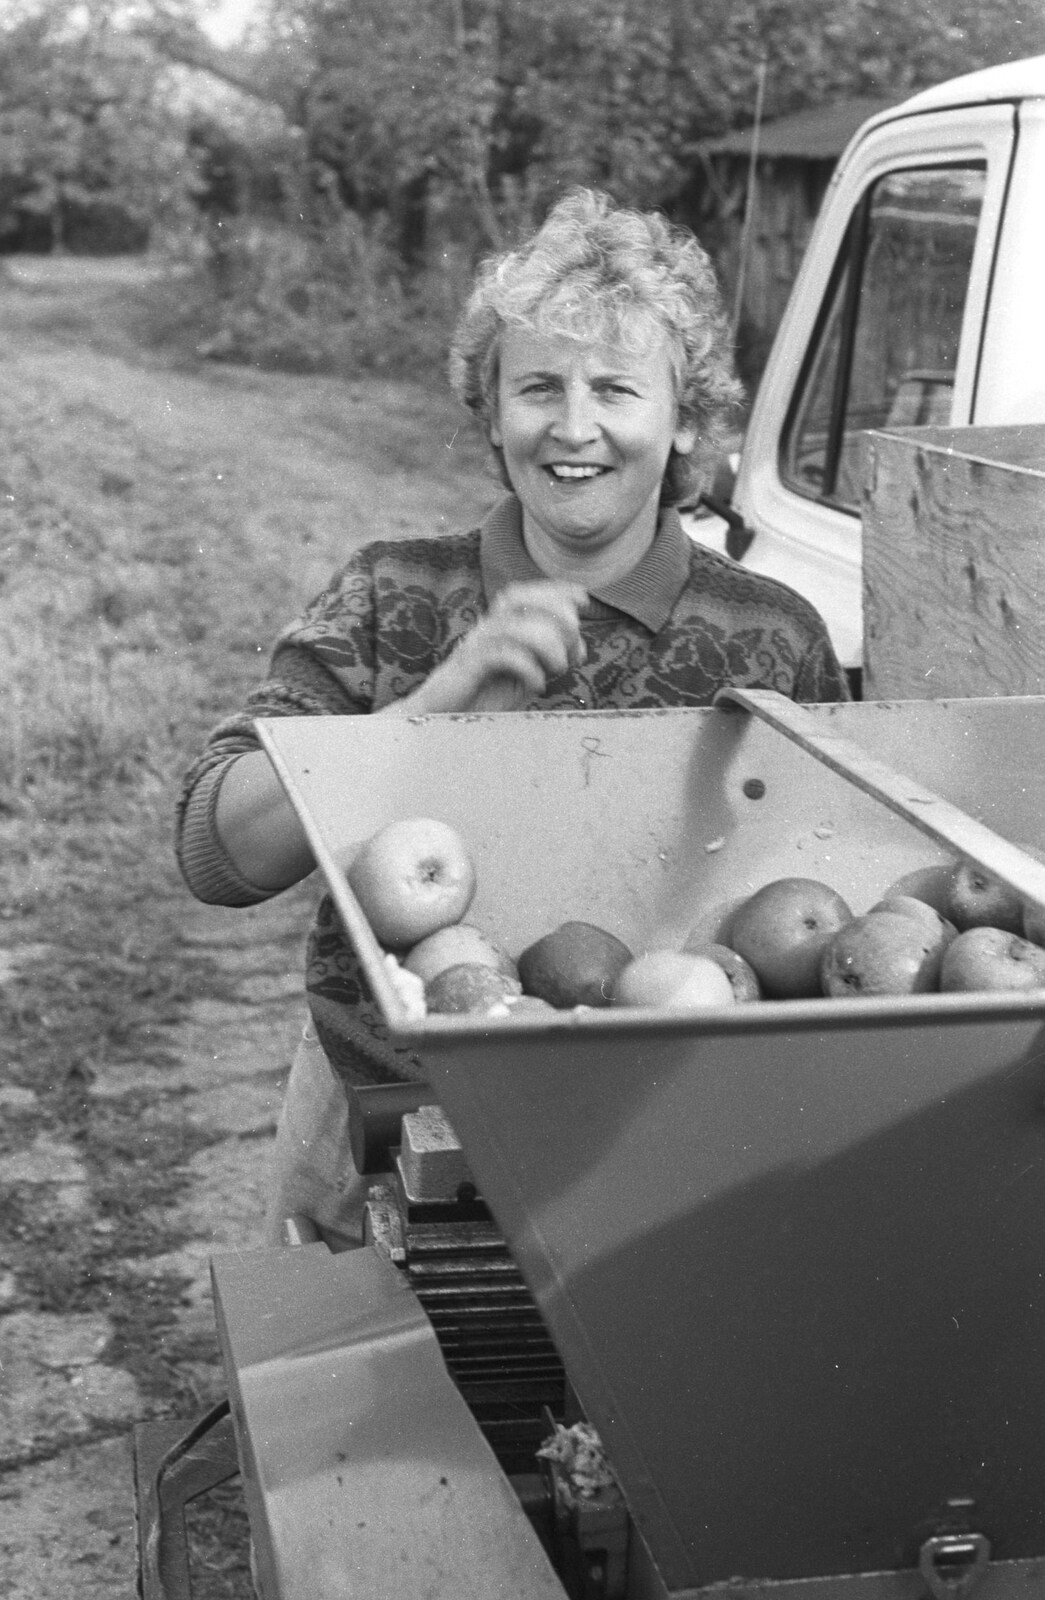 Linda by the chopper from Cider Making in Black and White, Stuston, Suffolk - 11th October 1992